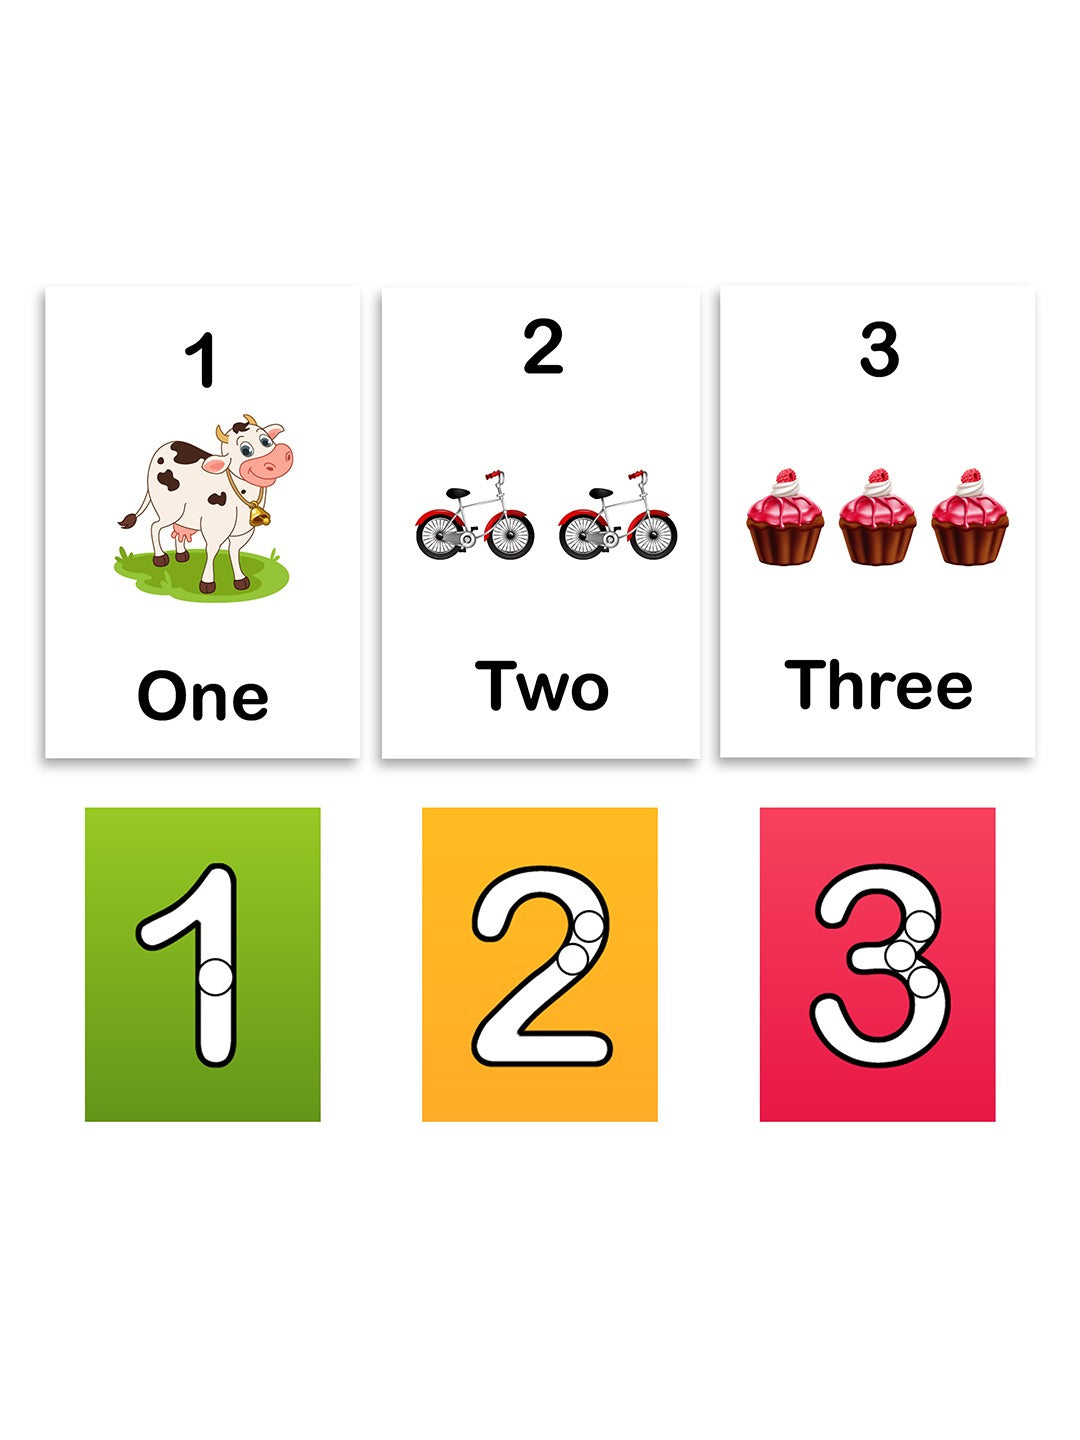 Baby's Alphabets and Numbers Flash Cards